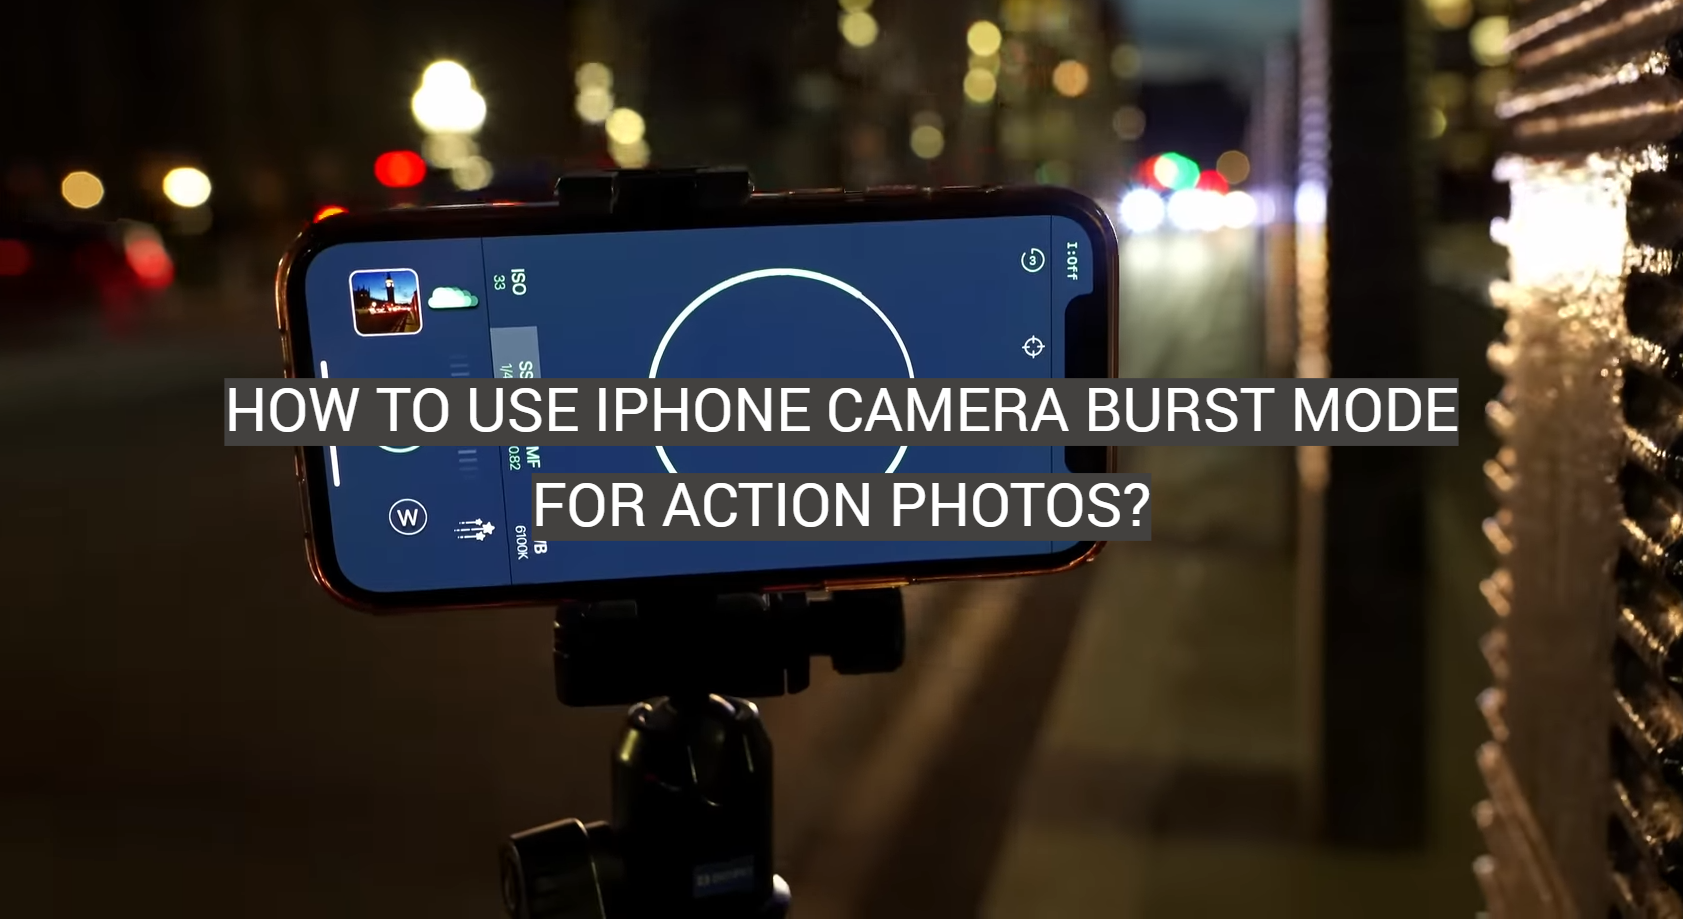 How to Use iPhone Camera Burst Mode for Action Photos?